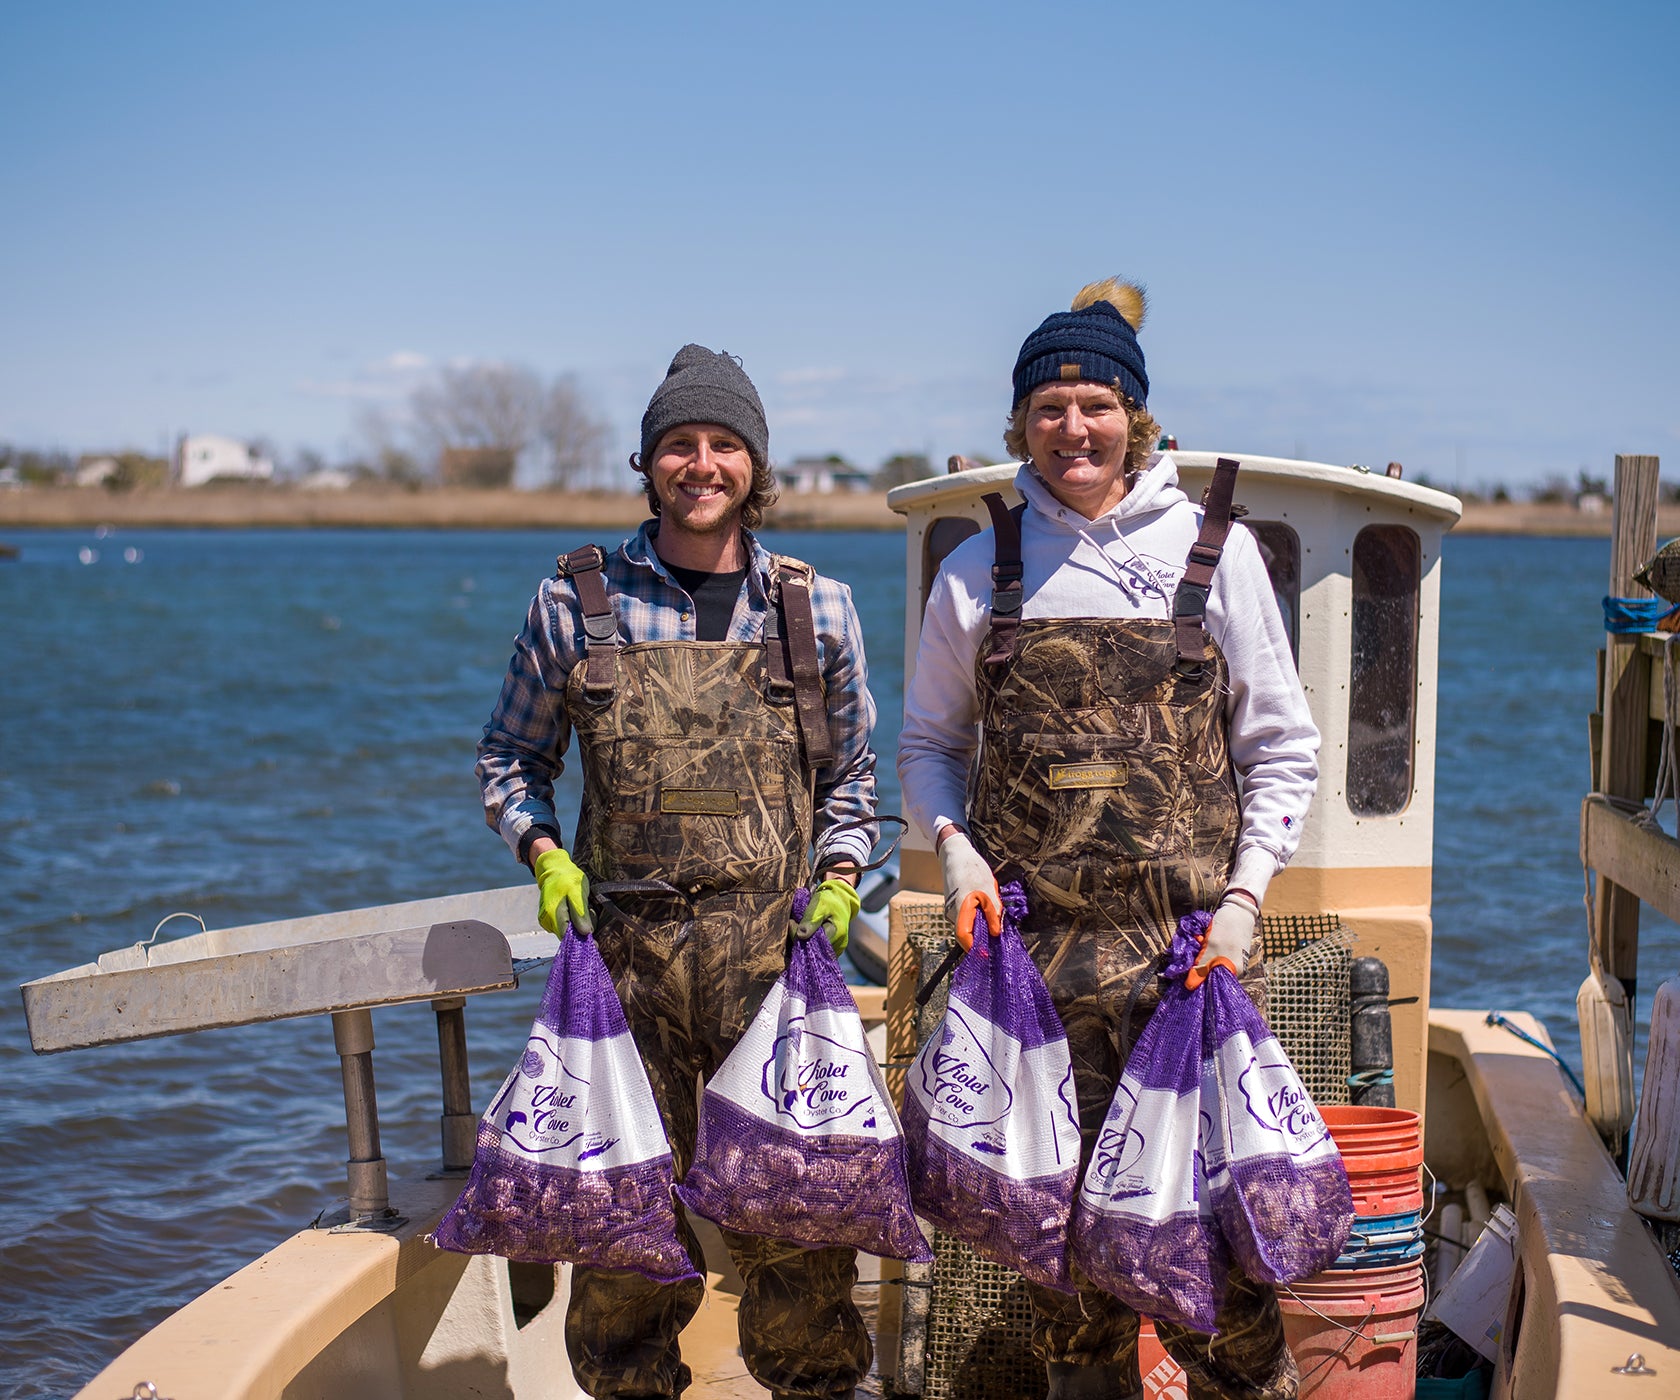 Violet Cove Oysters from Moriches Bay, NY